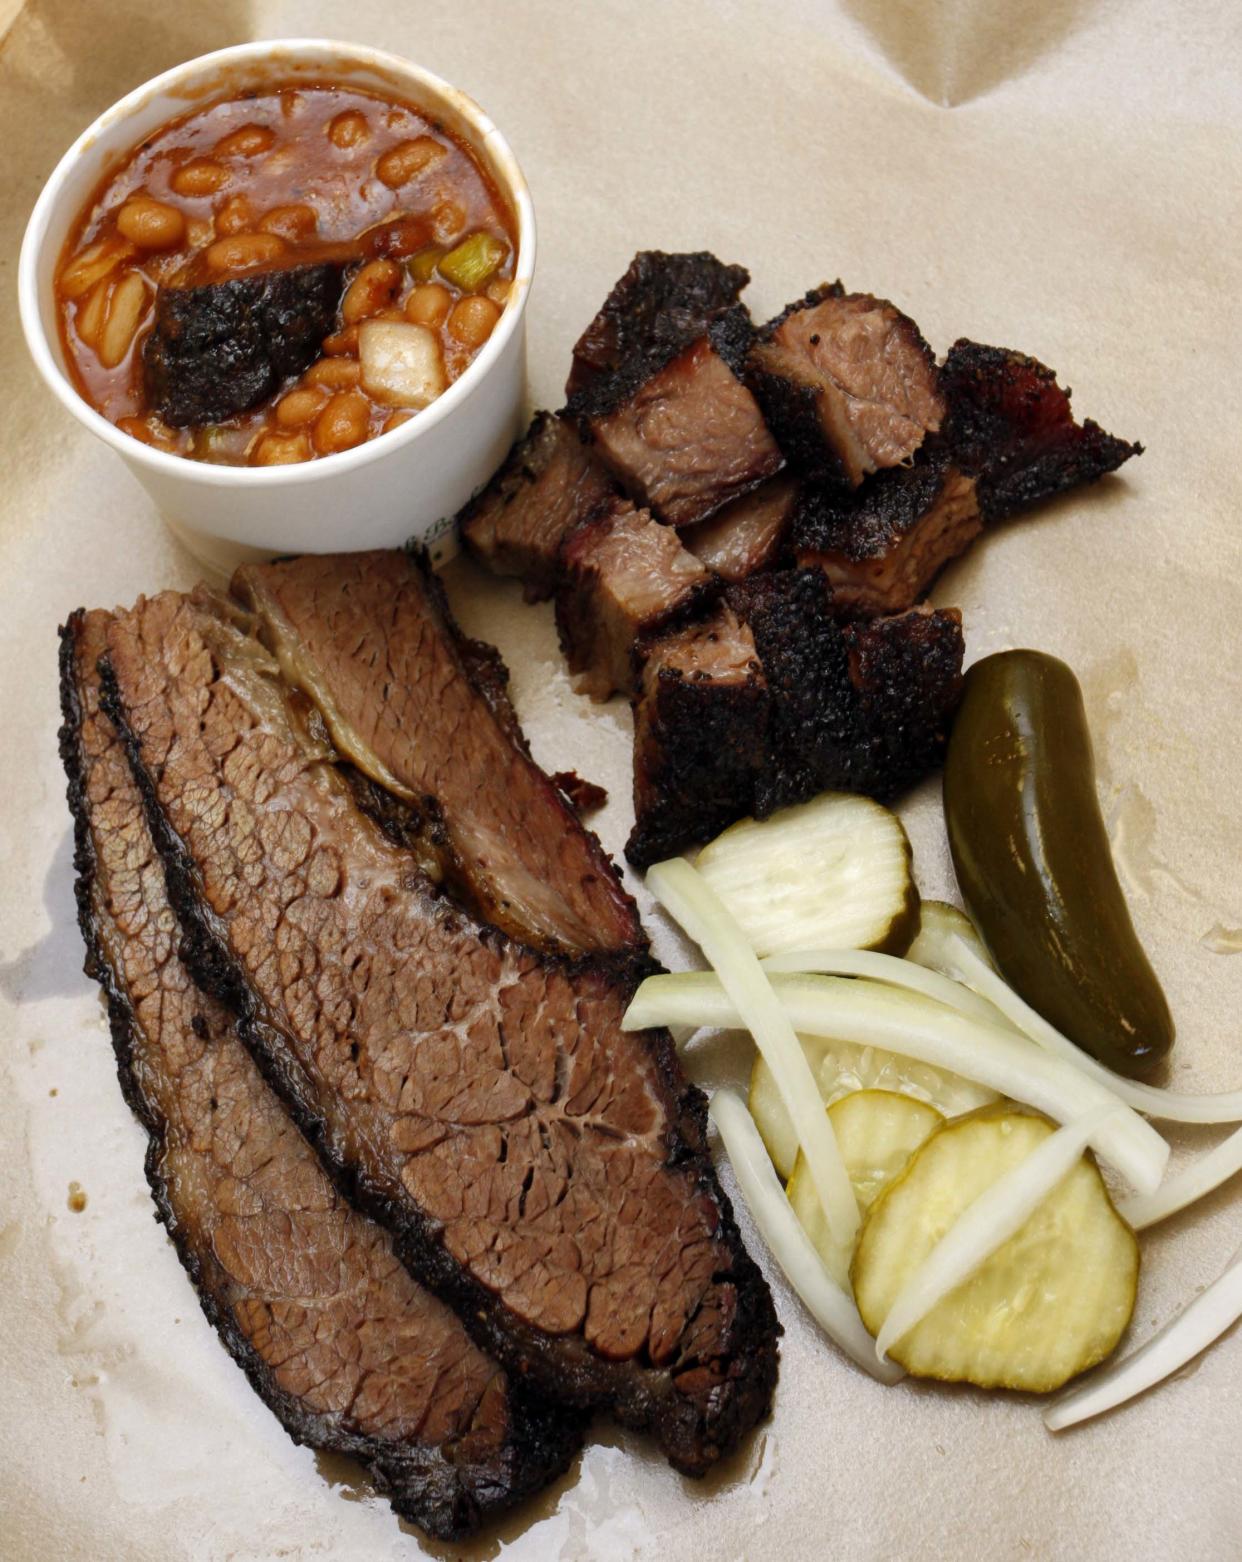 The burnt ends with brisket and beans is one of the popular choices at City Butcher in south Springfield.